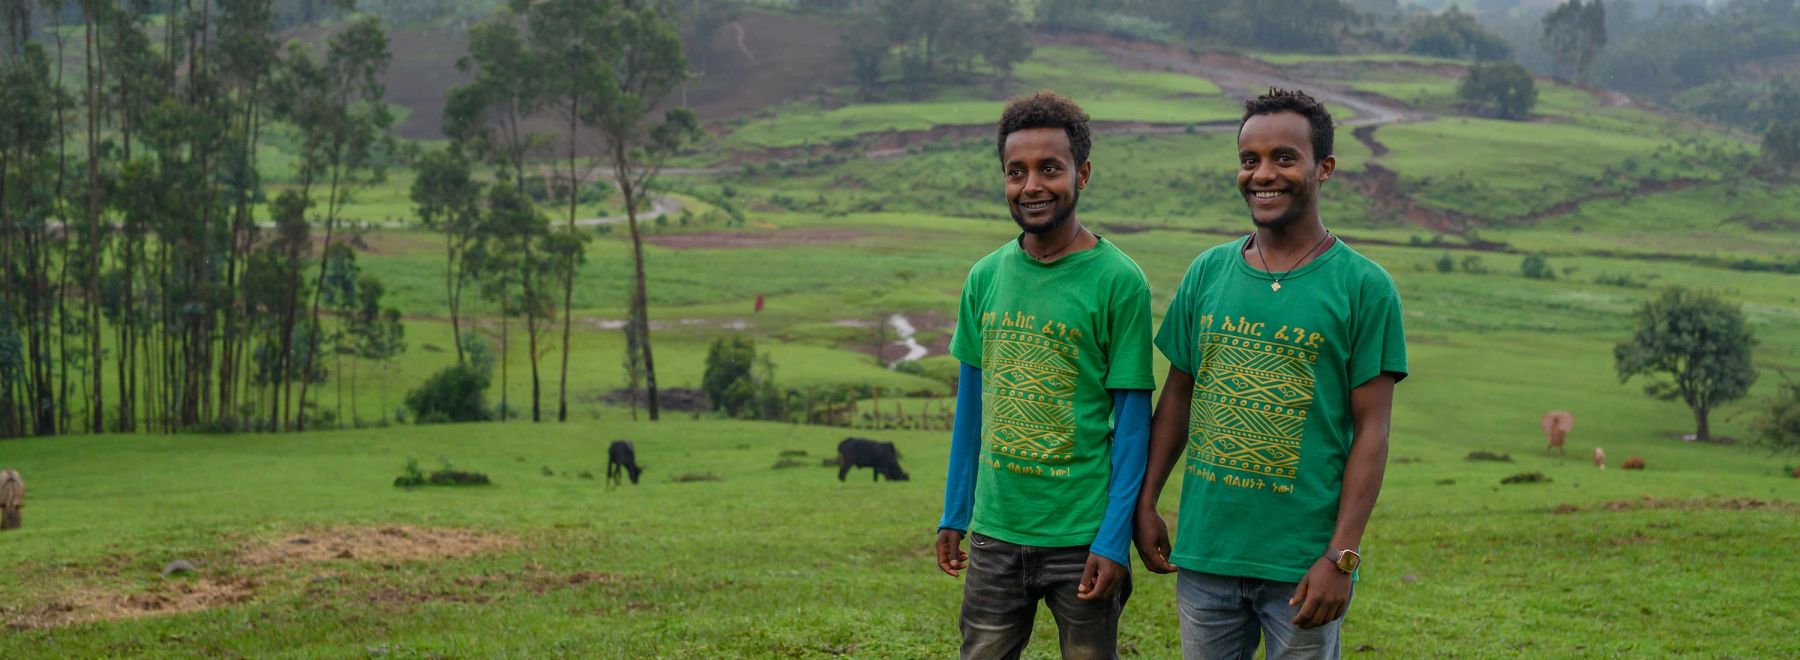 Two One Acre Fund Ethiopia staff members stand in the field 